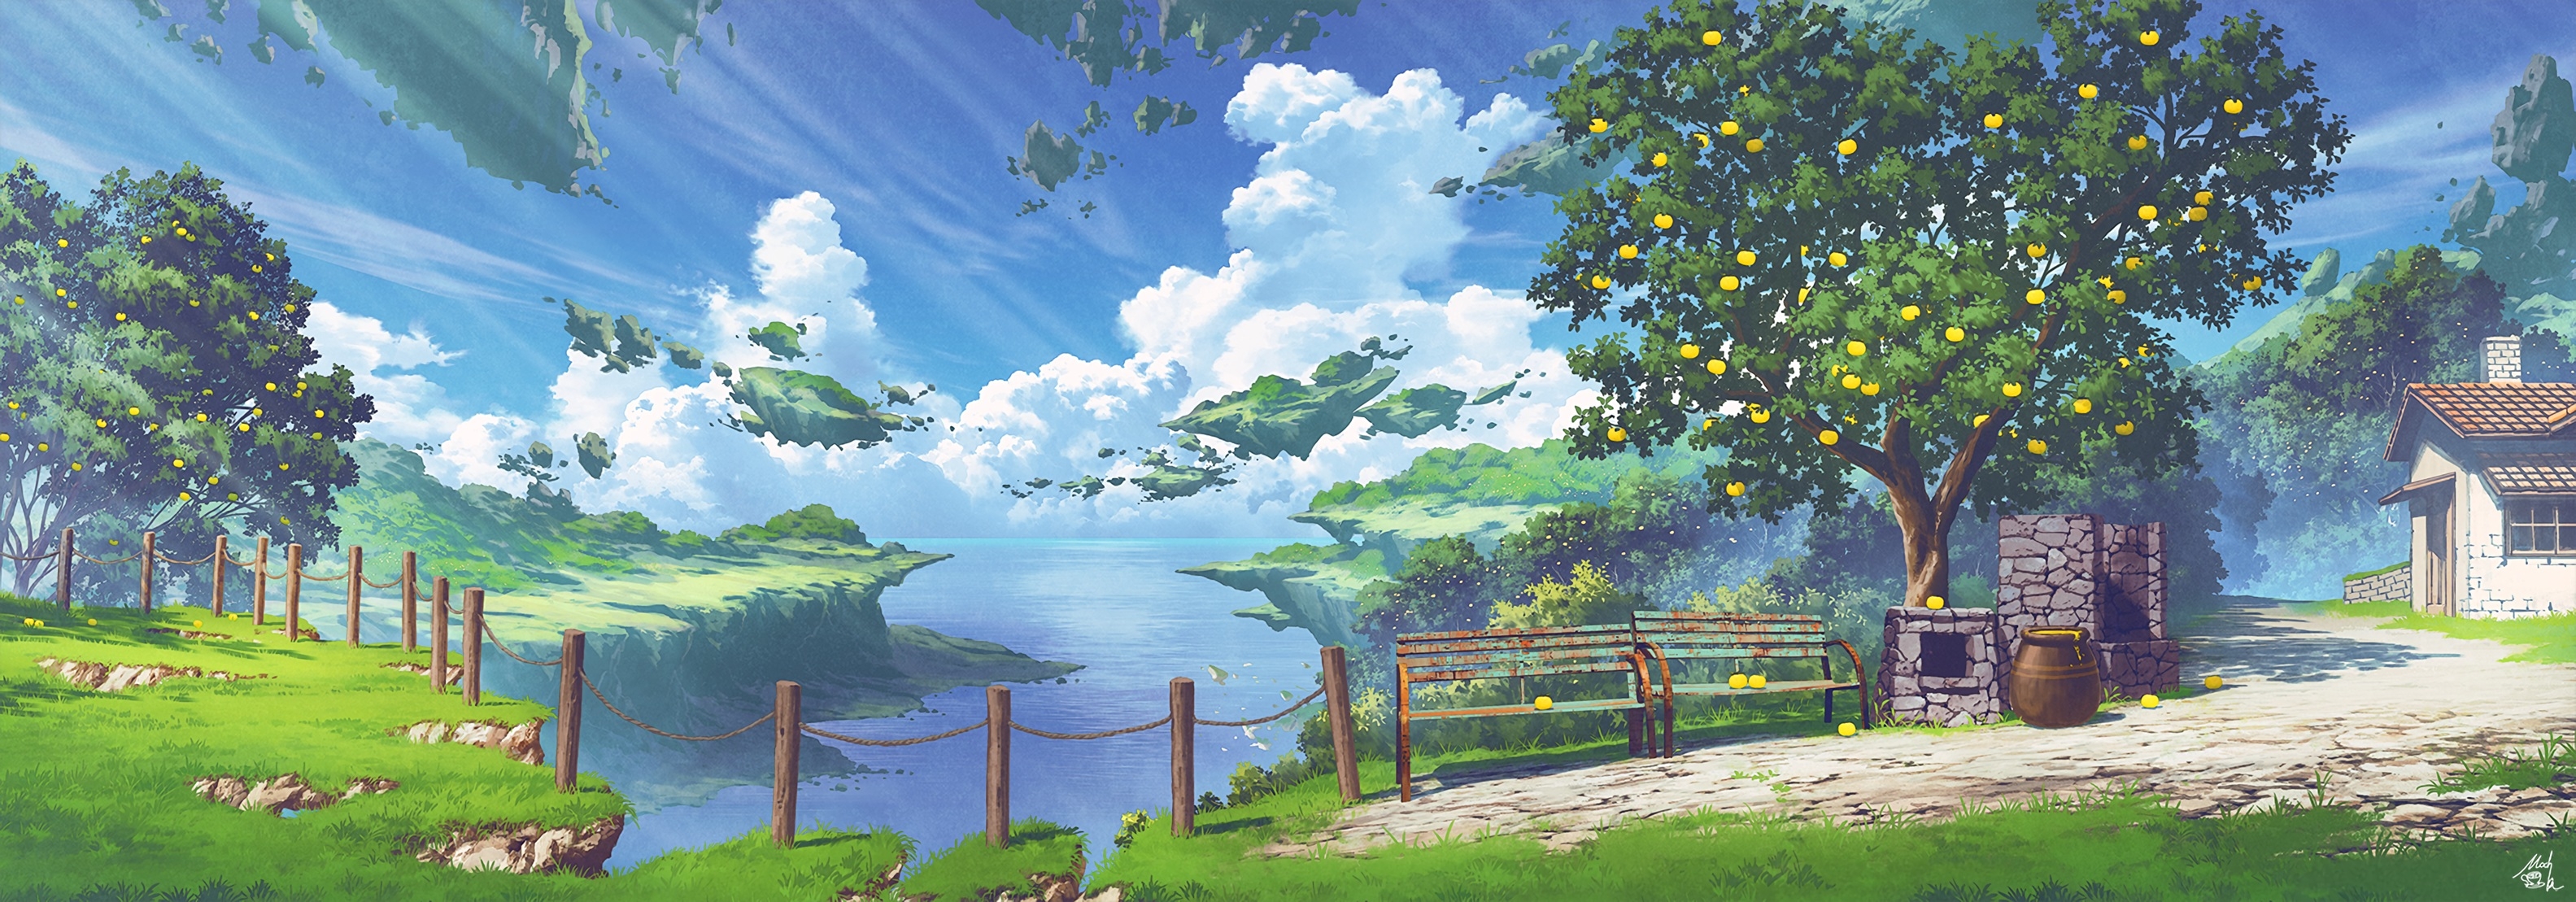 Anime Landscape Nature Sky Clouds Trees Bench 3167x1109